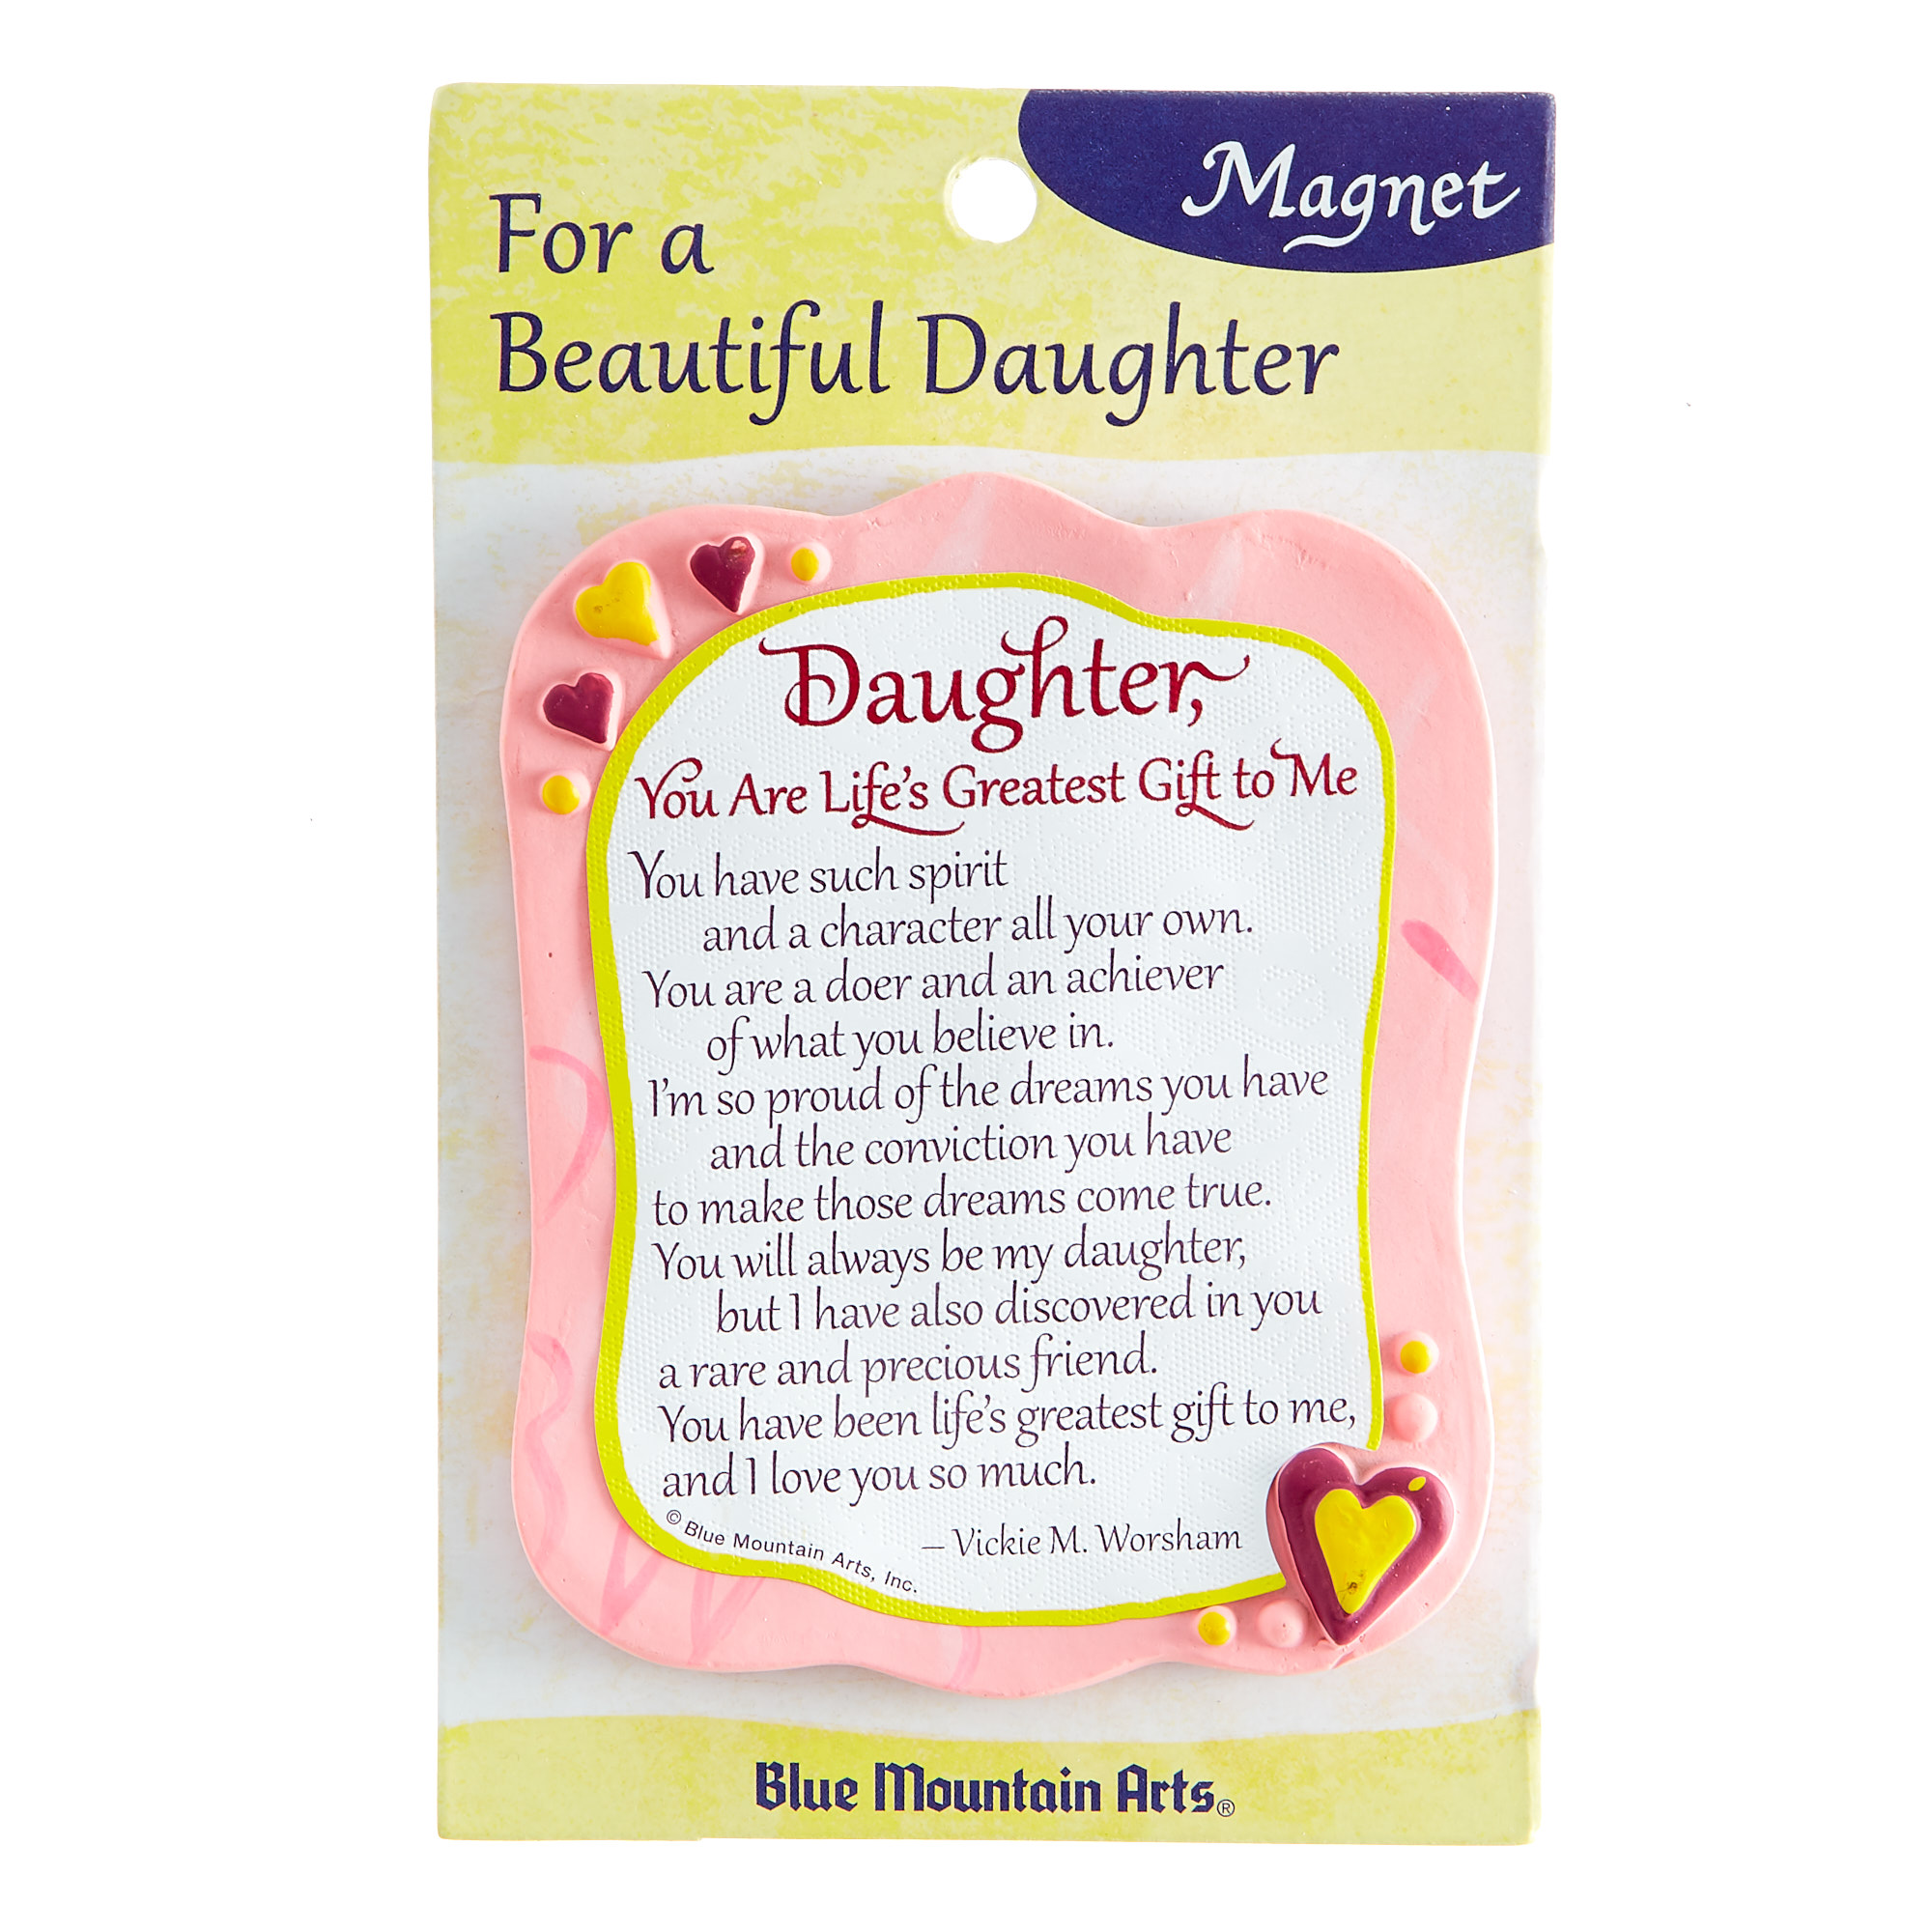 Blue Mountain Arts Magnet - Daughter, Life's Greatest Gift